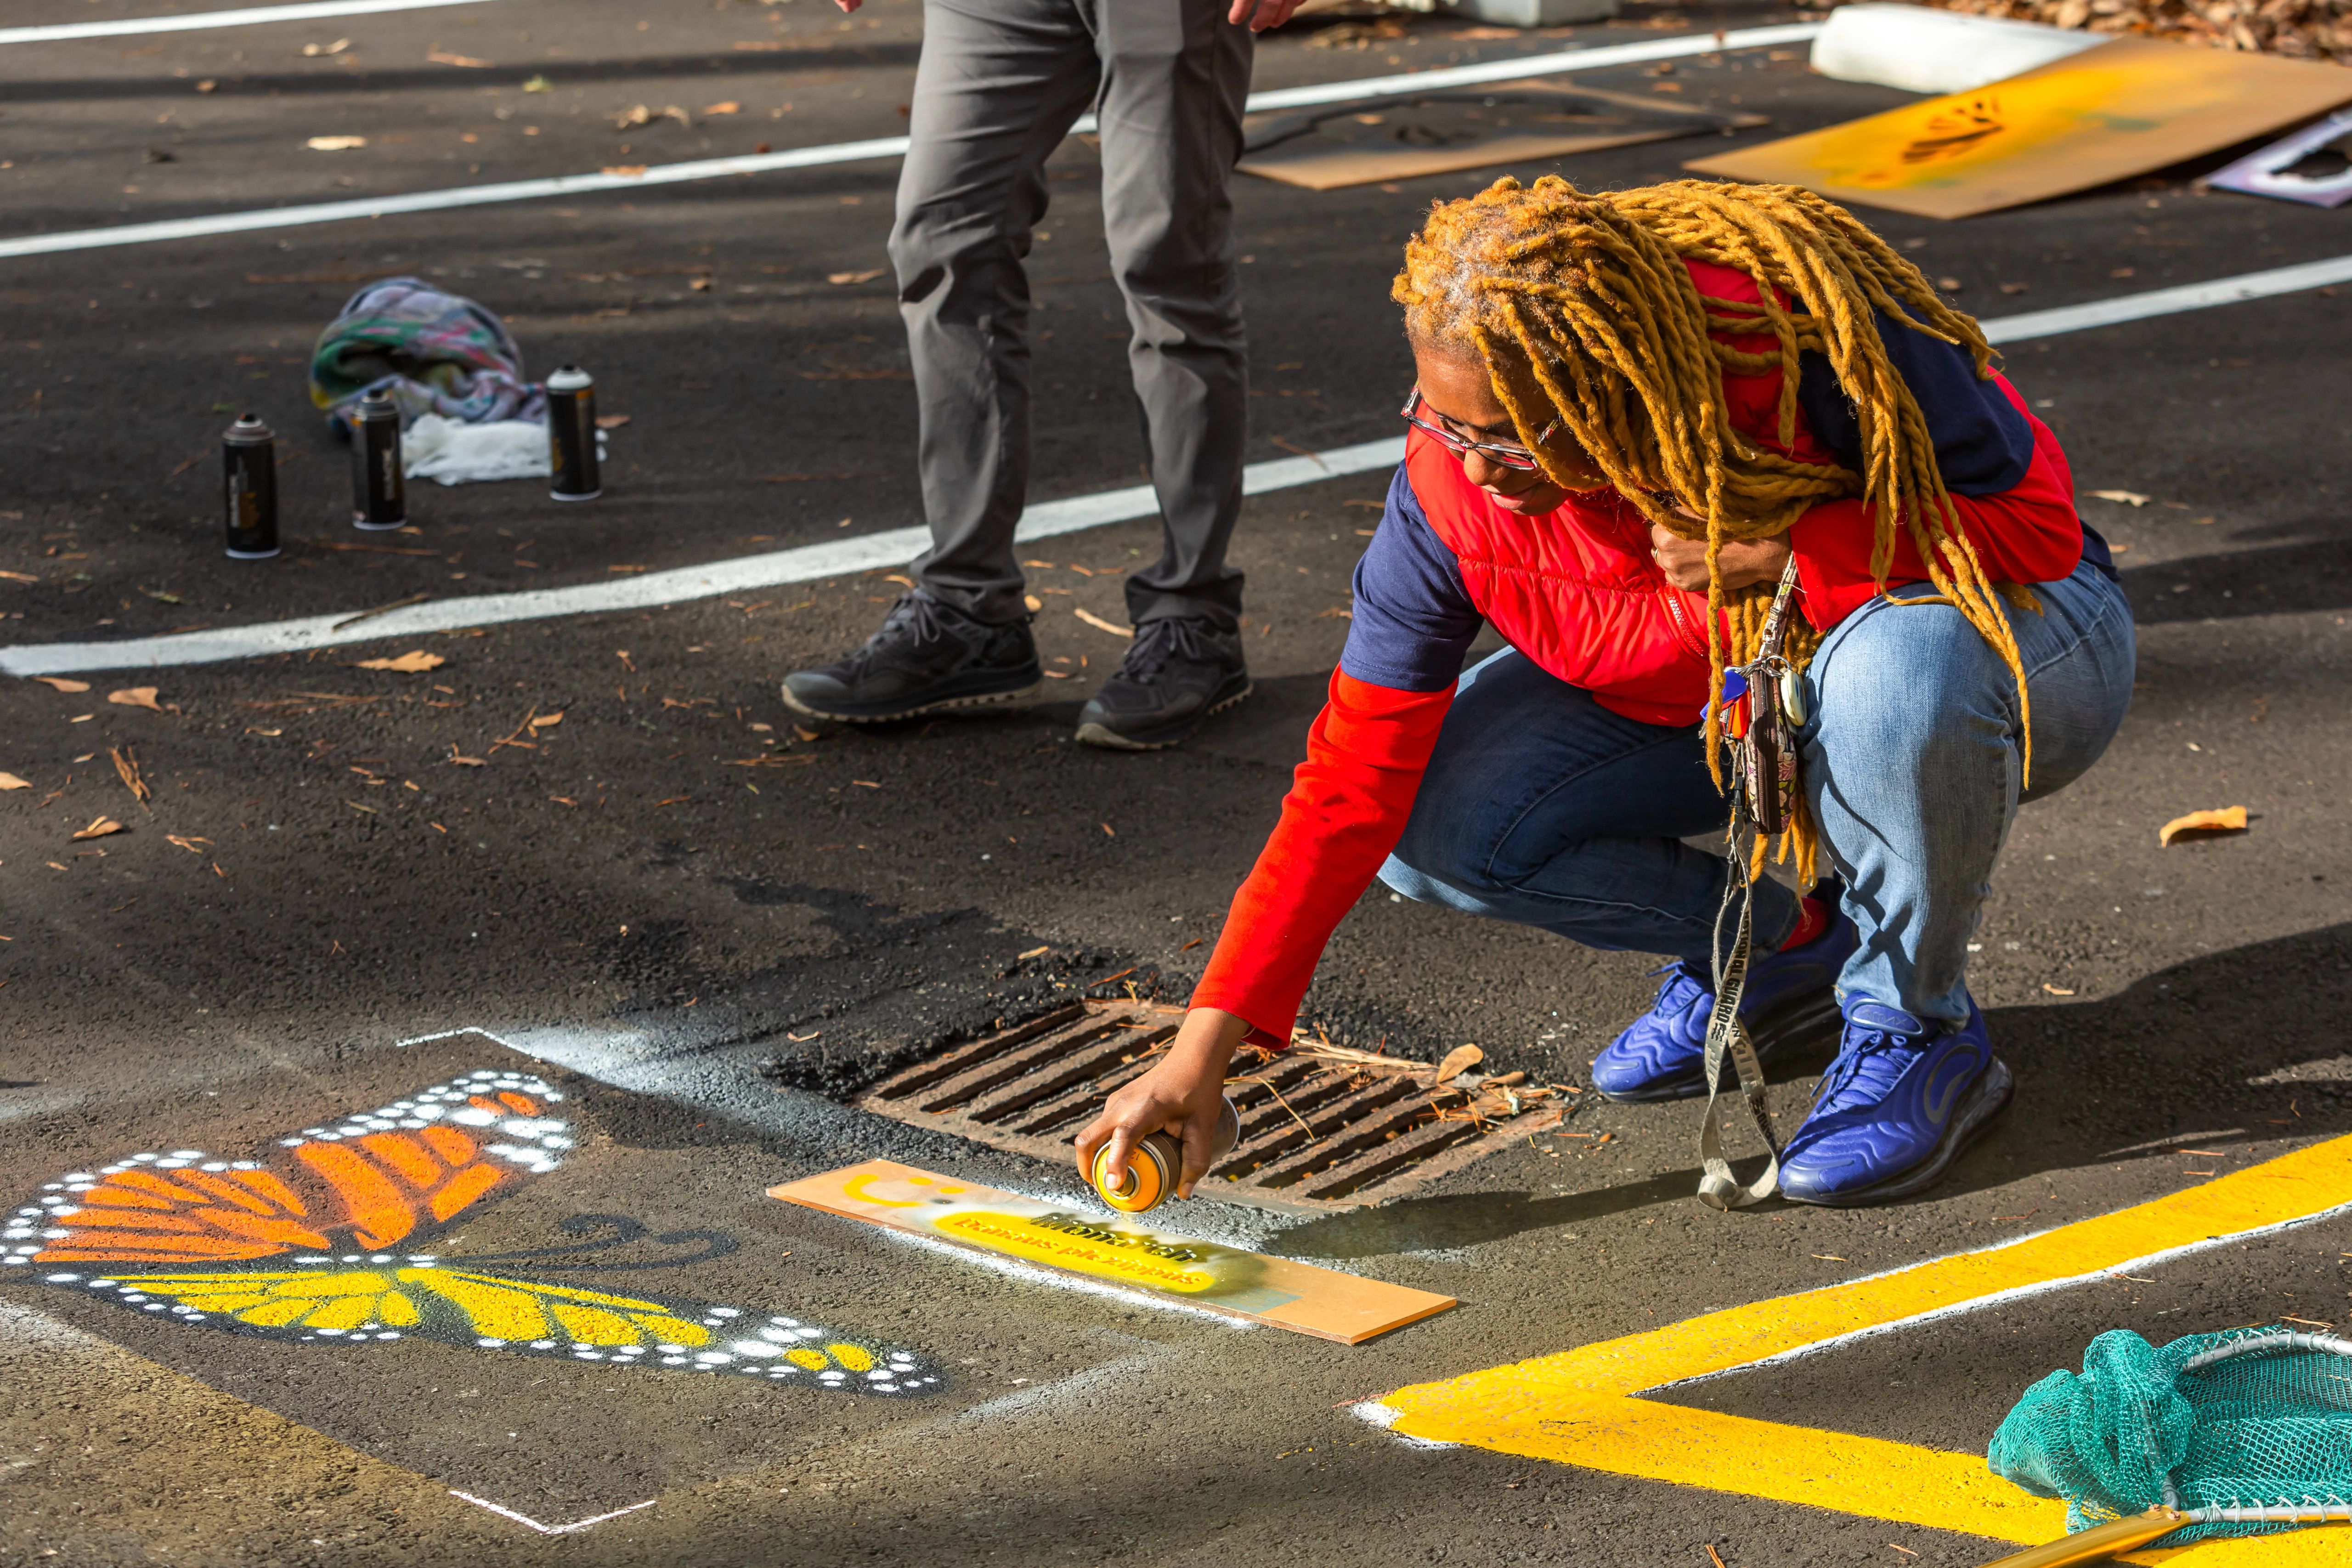 A teacher from Newport News Public High Schools participates in a “Paint Out Pollution” activity.